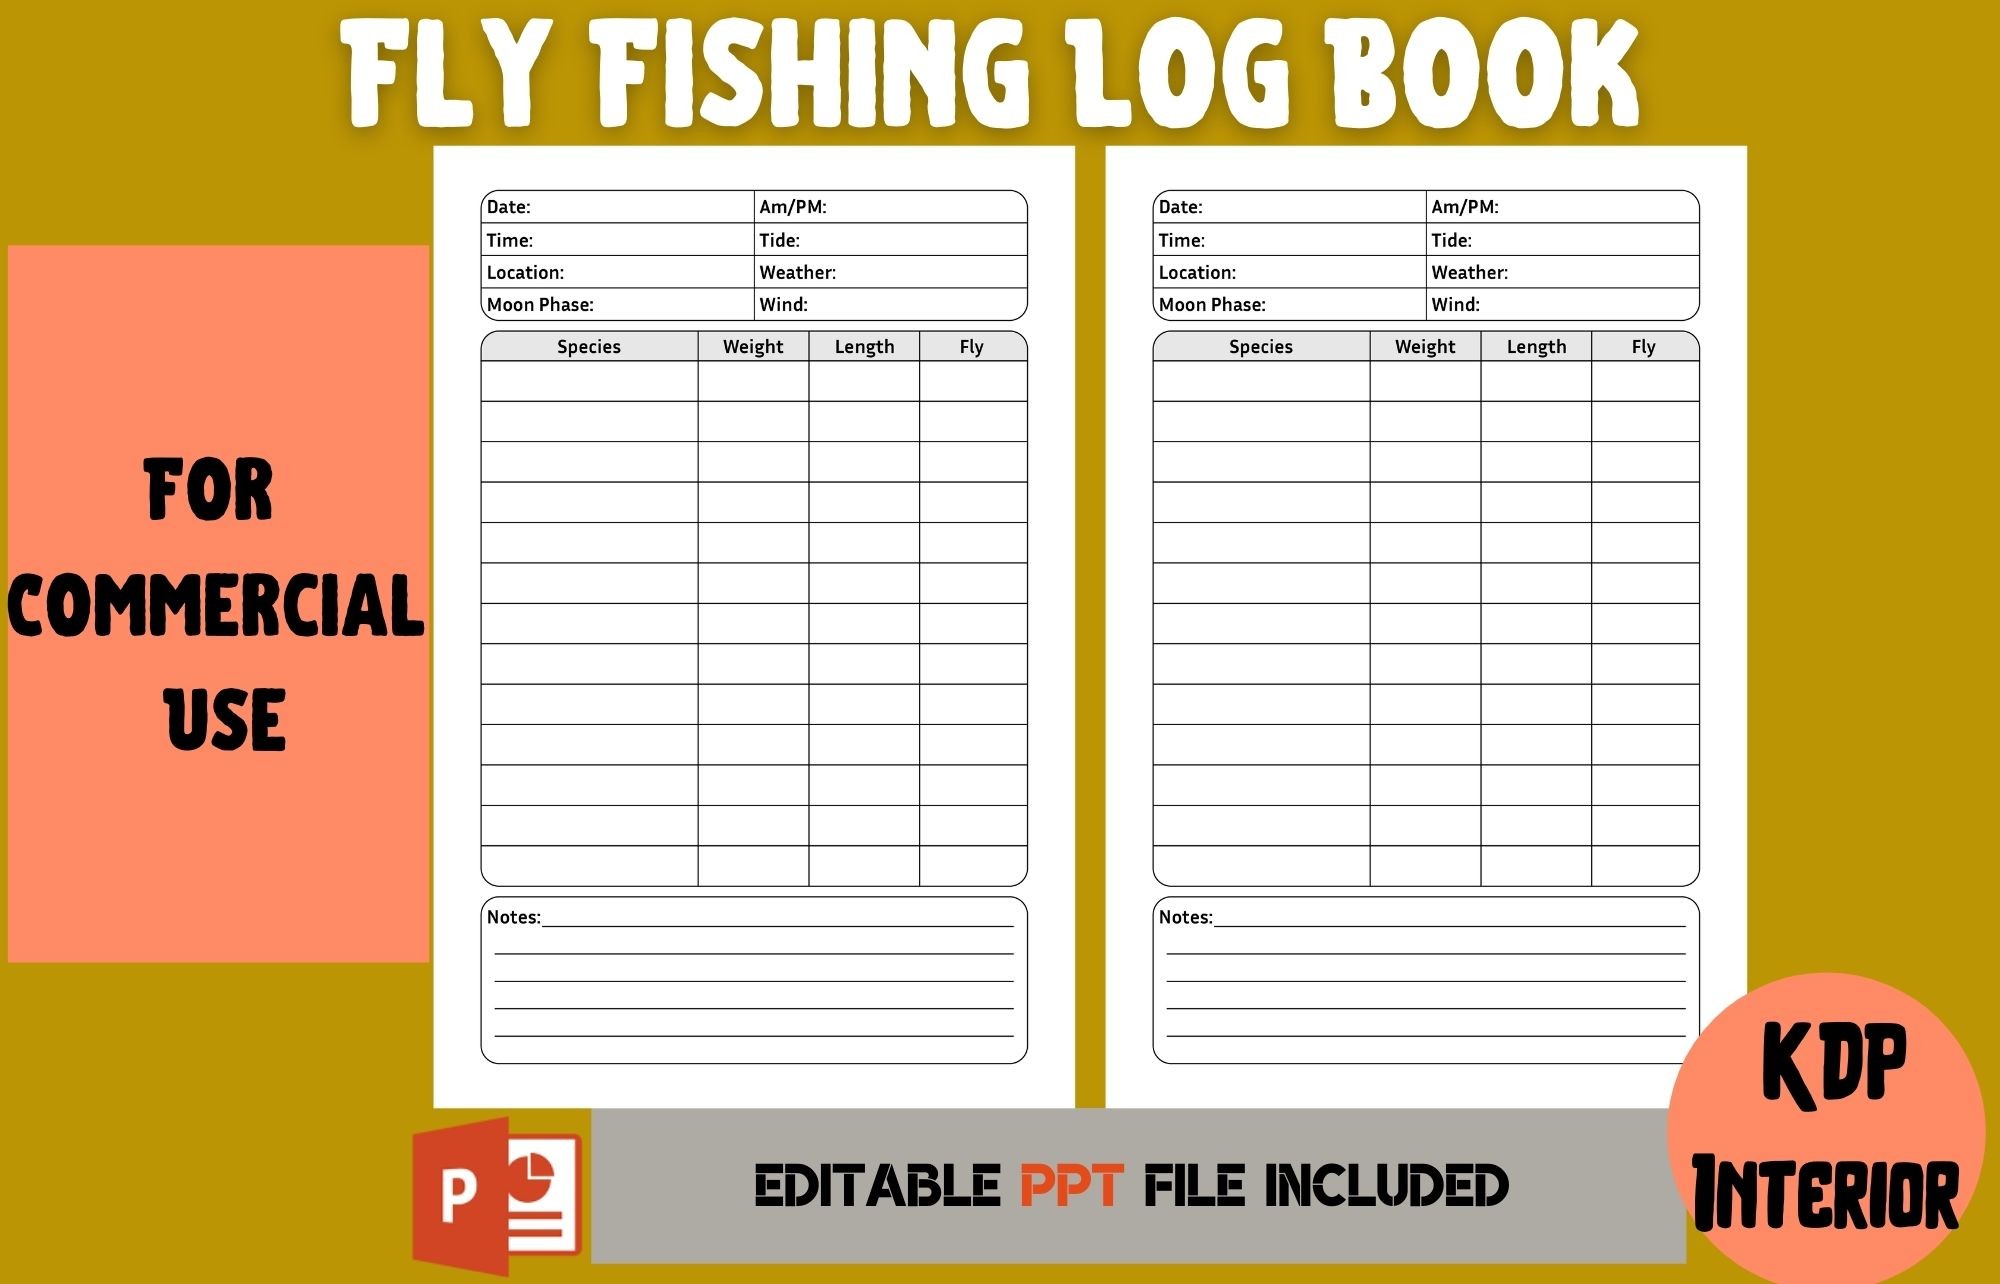 Fishing Log Book Gmeleather: Fly Fishing Logbook Cover Matte Size 7 X 10  Inch - Notes - Fishing # Idea 110 Page Standard Print. (Paperback)